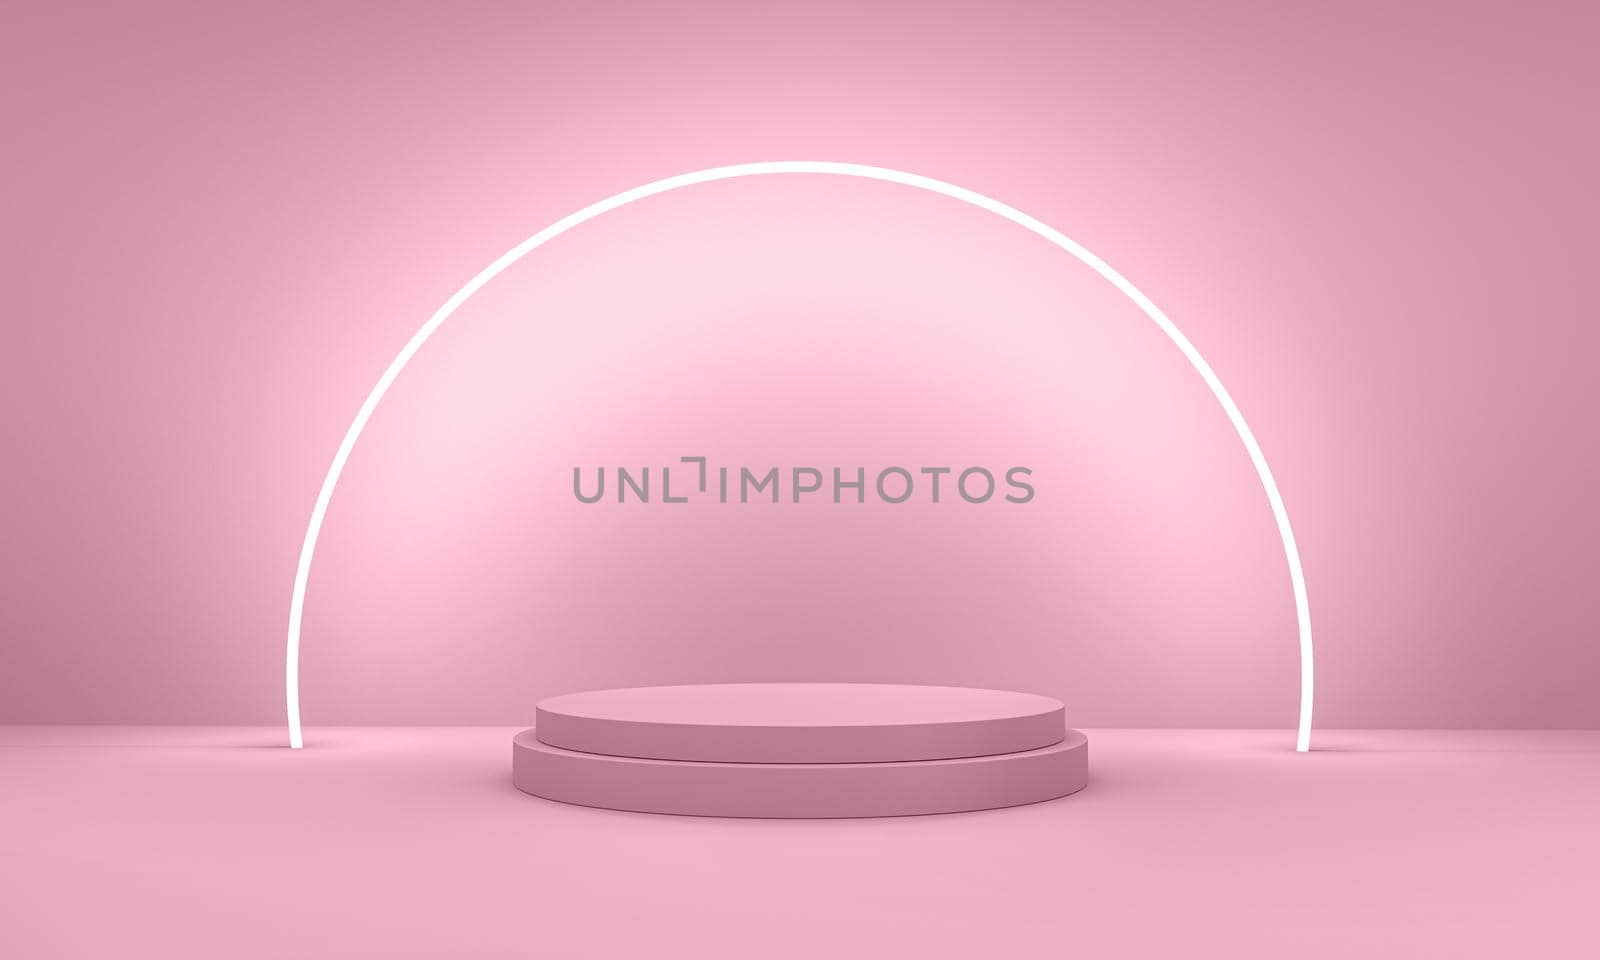 Neon podium for valentine's day, abstract geometric design pink background. 3d rendering.